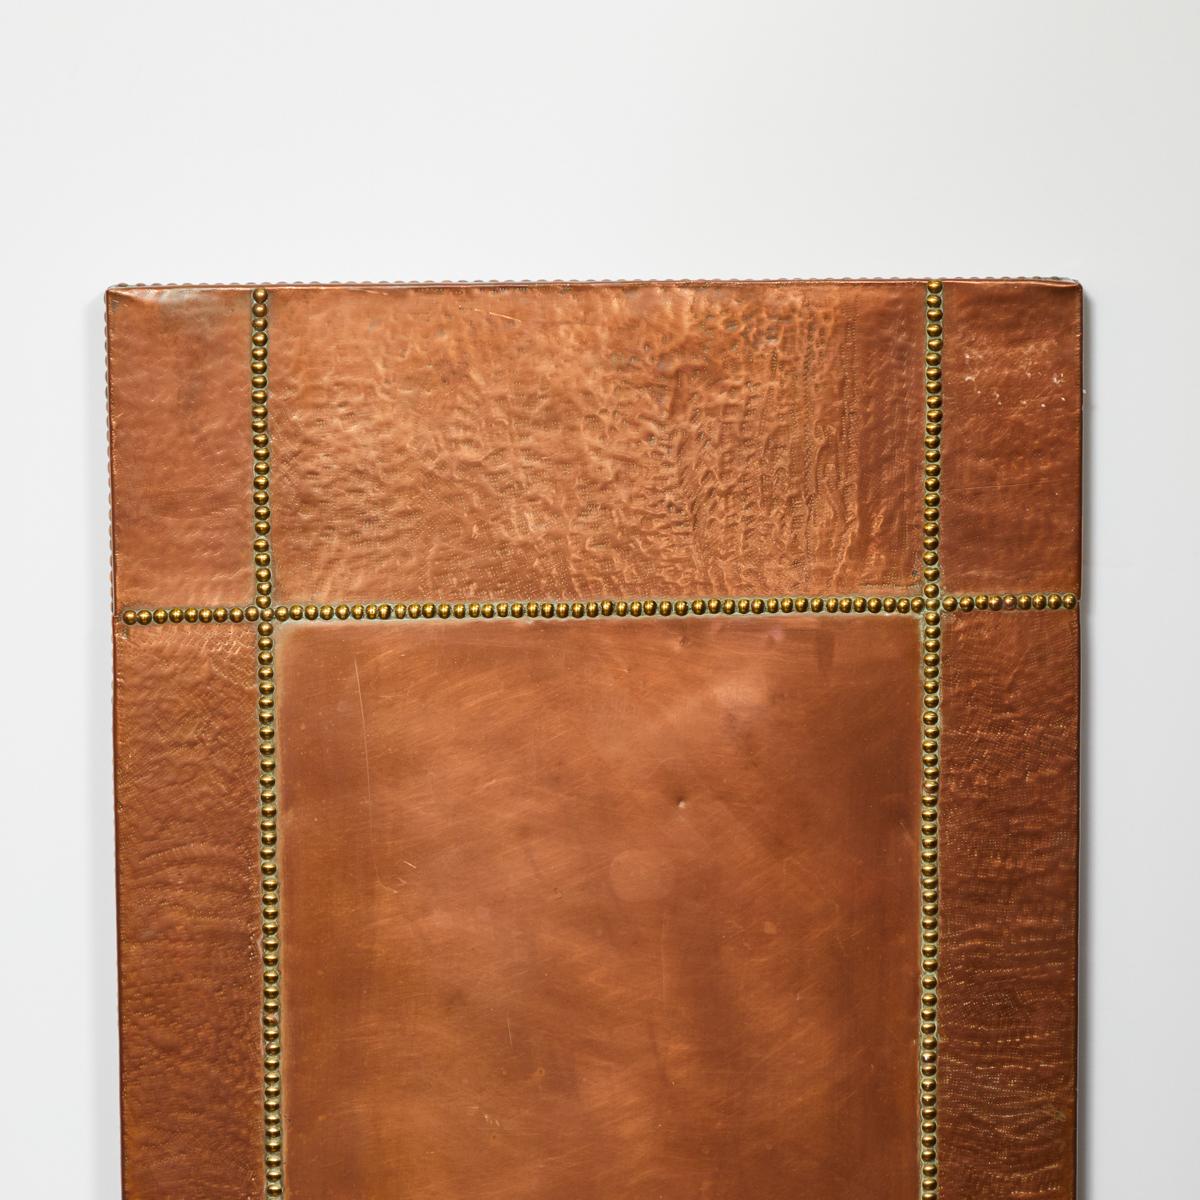 Textured copper and brass riveted panel from mid-century France. A piece of art in its own right, the panel has a unique texture reminiscent of webbing. Stylistically it has shades of art deco, the arts and crafts movement, and the modernist